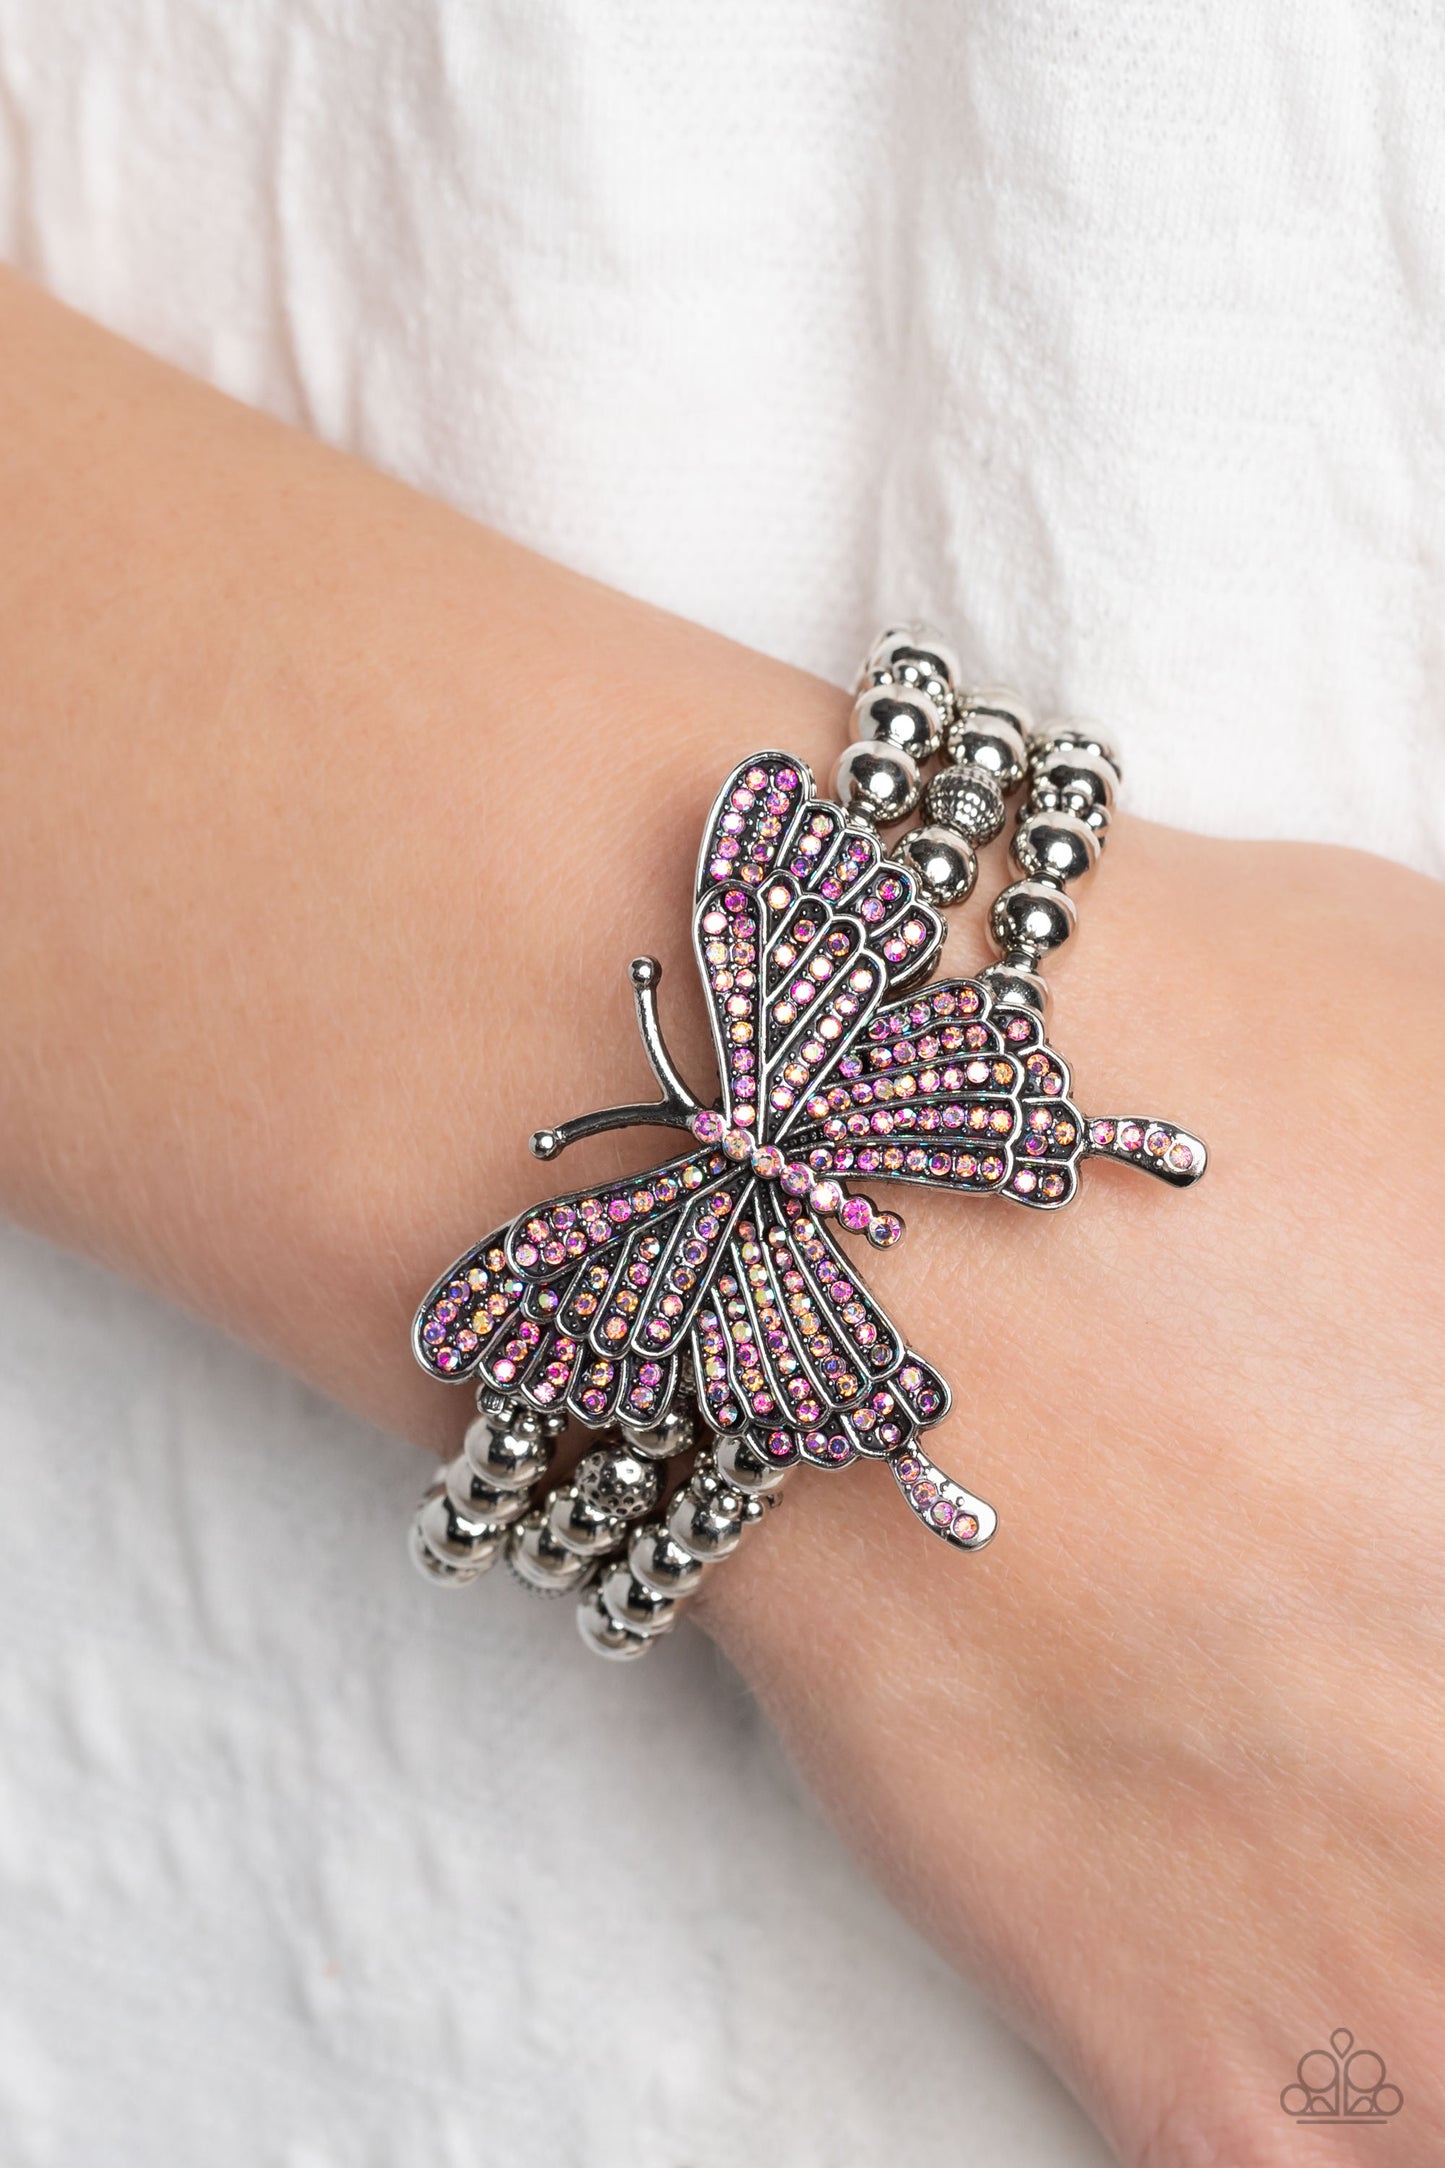 Paparazzi Accessories First WINGS First - Pink Strung along elastic stretchy bands, a trio of silver and textured silver beads and accents wrap around the wrist. Featured atop the beaded collection, an oversized silver butterfly, with intricate details, i